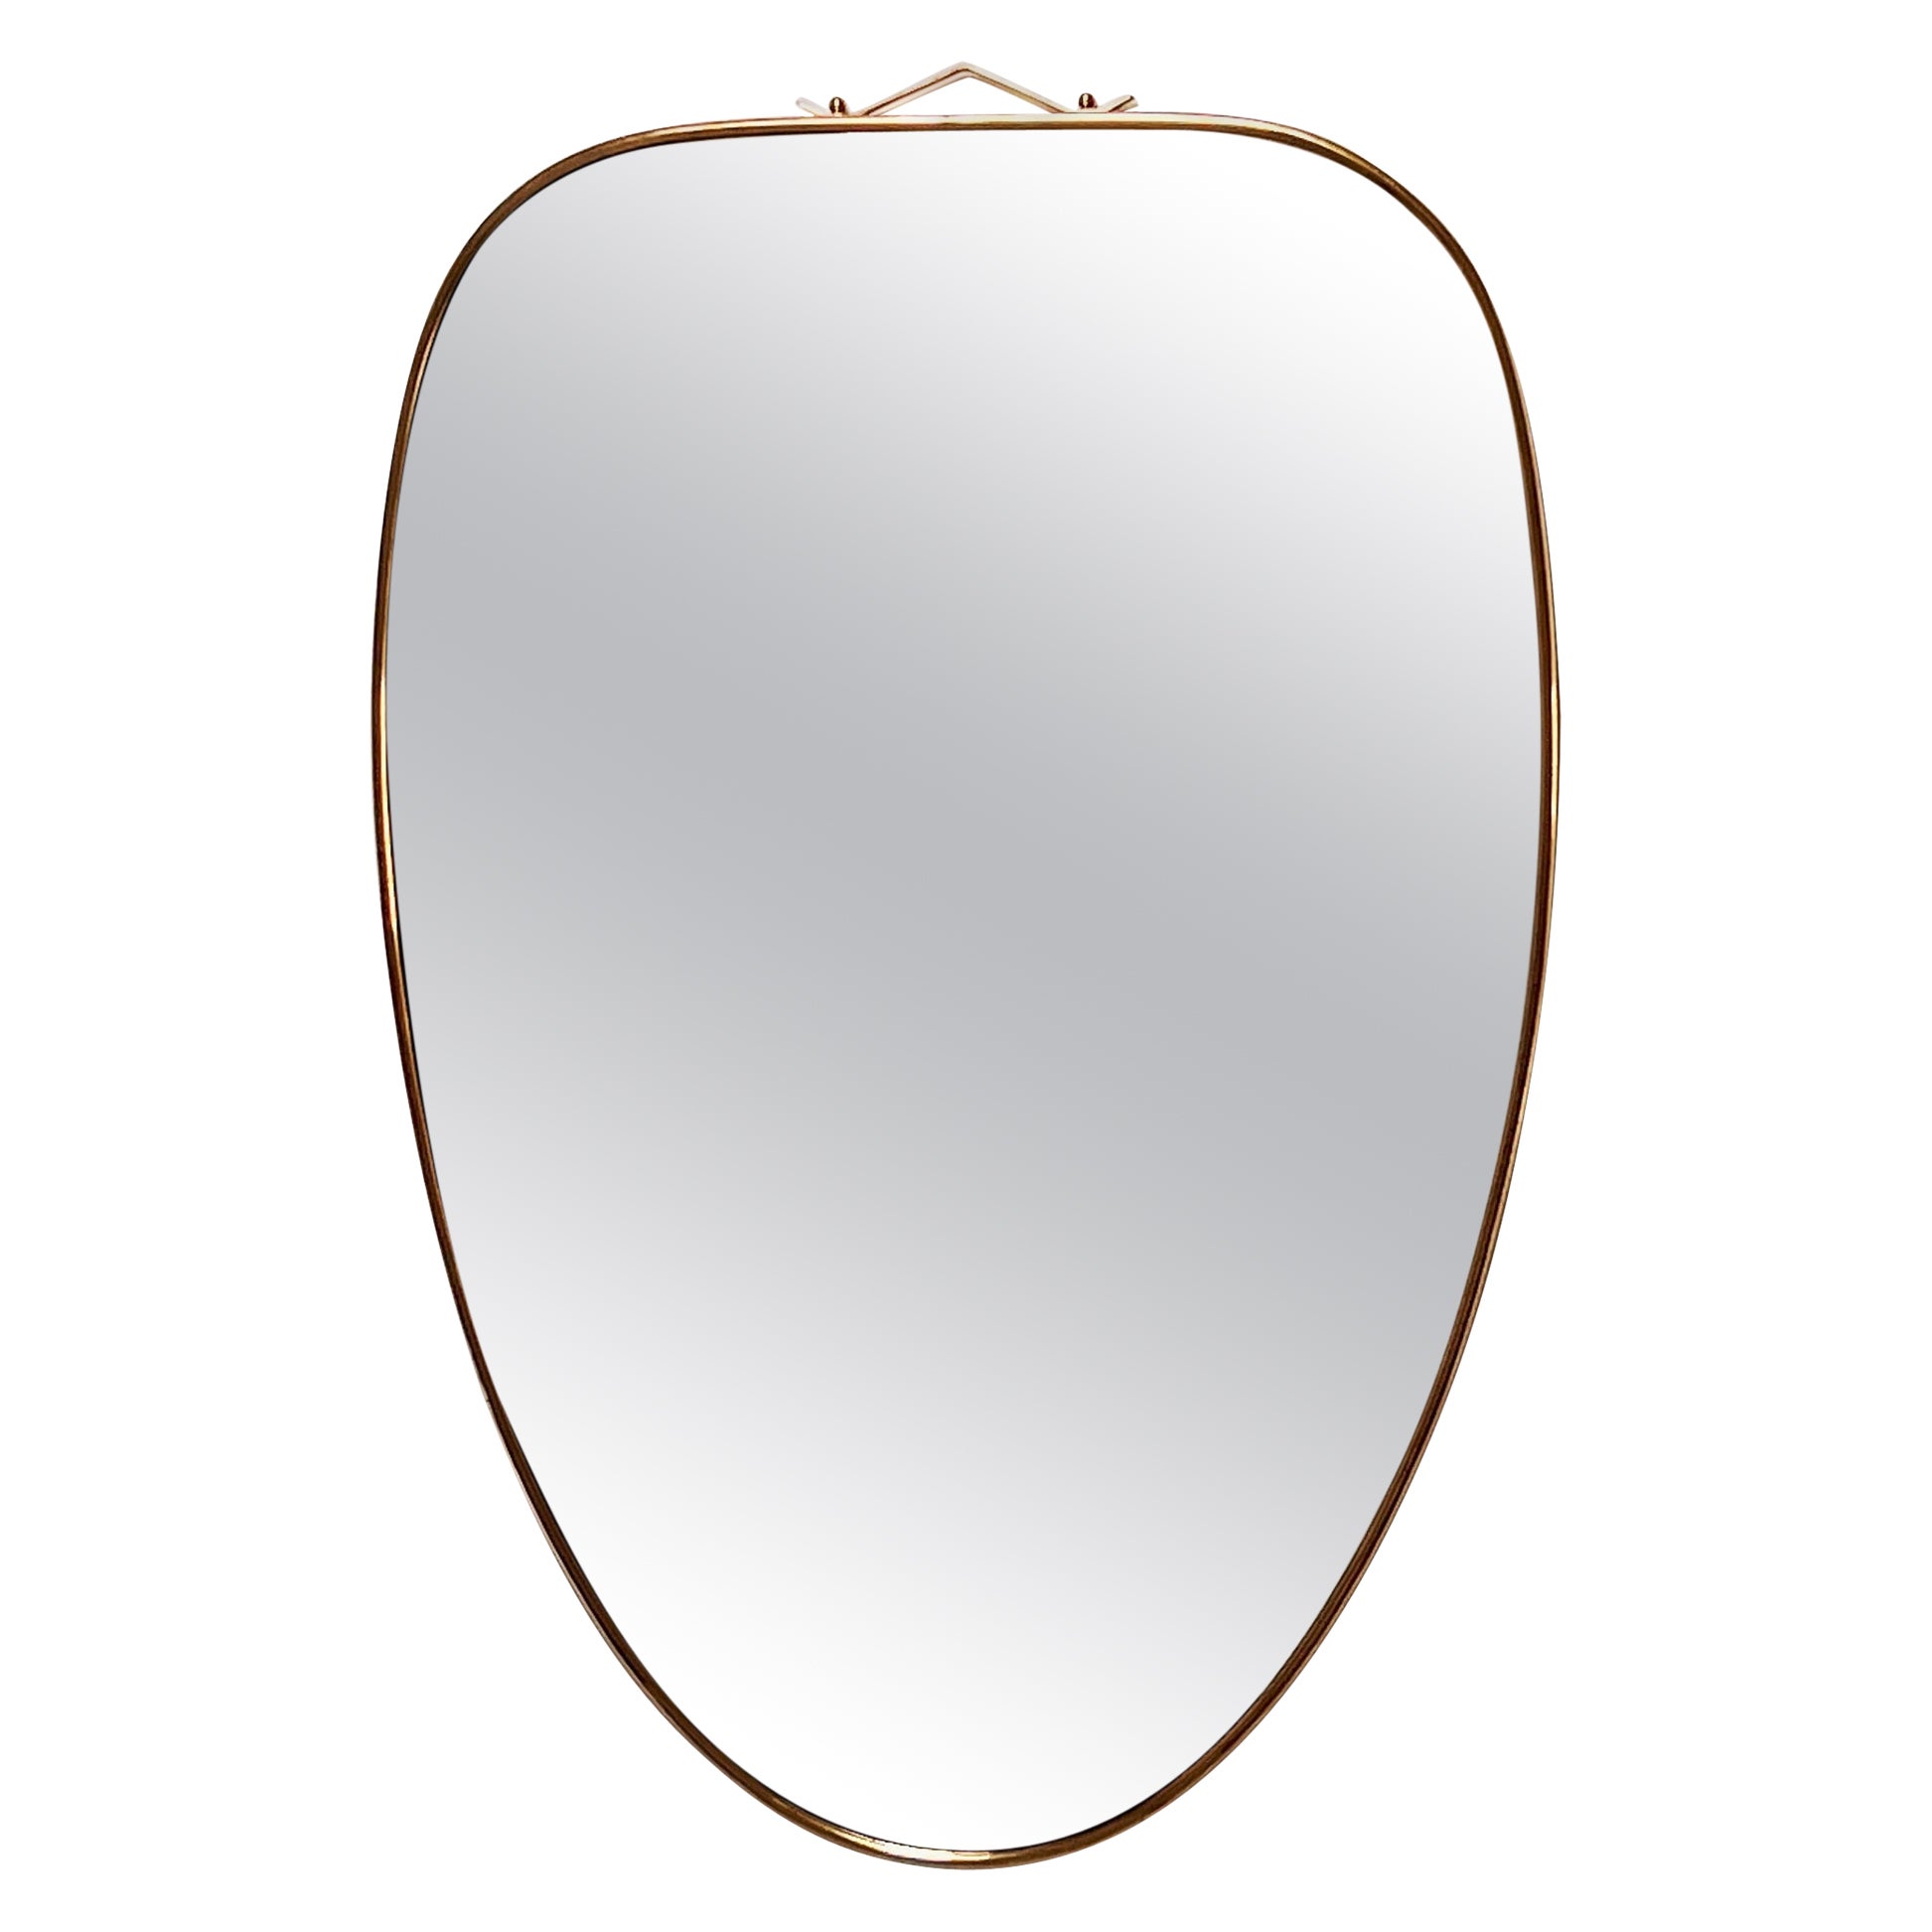 Italian Mid-Century Vintage Wall Mirror with Brass Frame and Decoration, 1970s